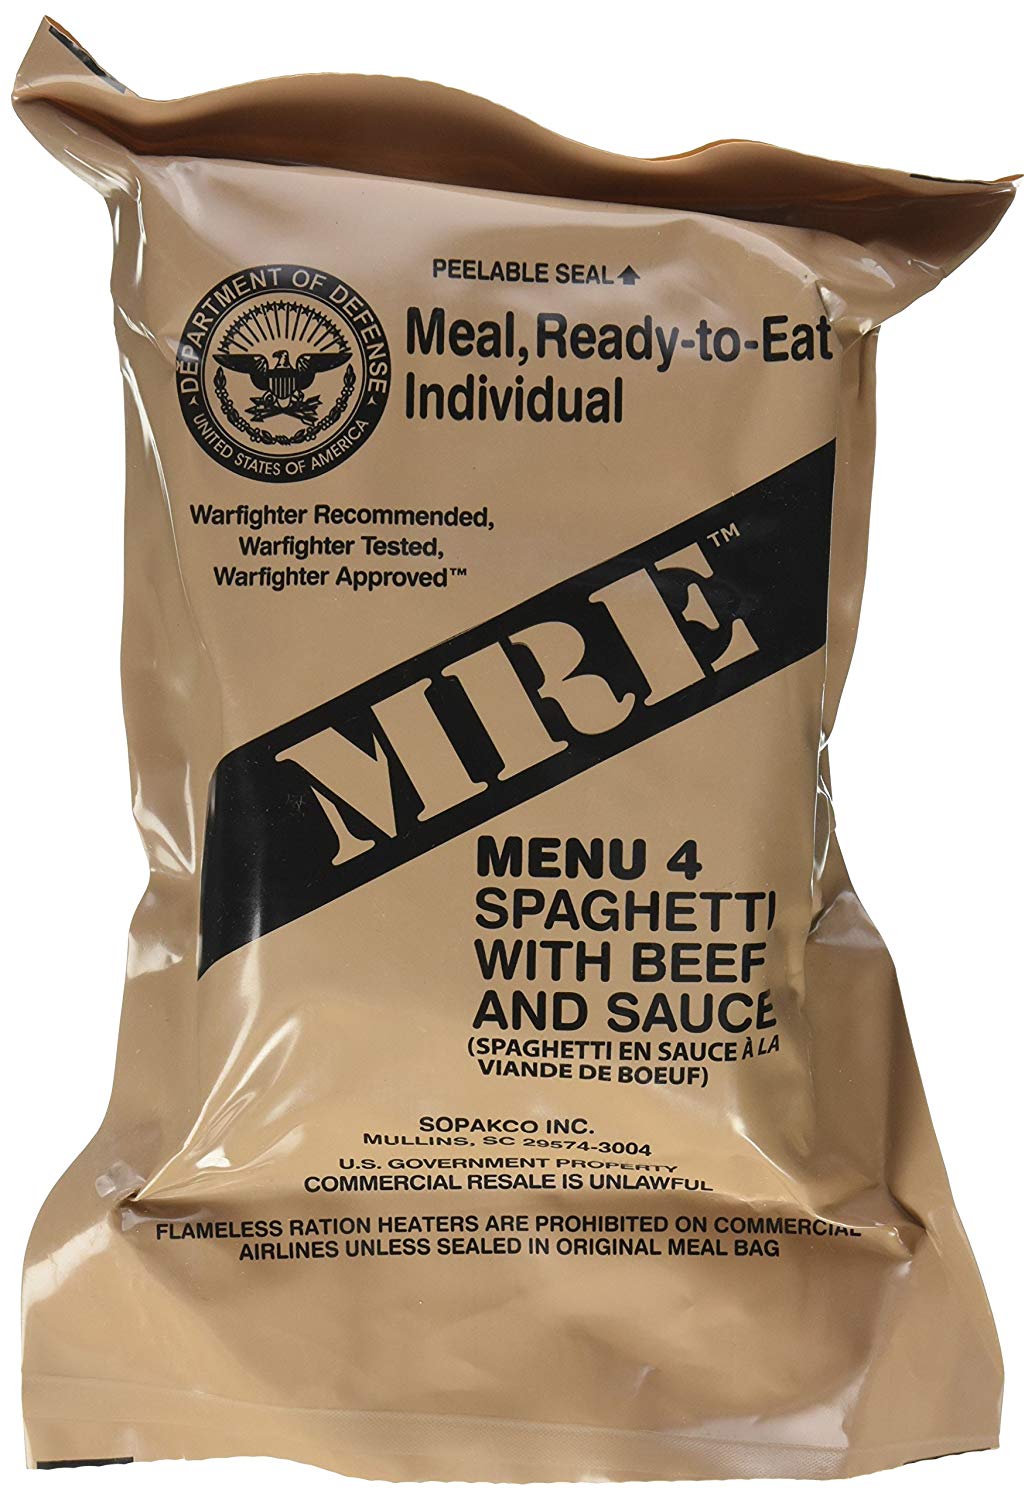 MRE meal ready to eat a7217